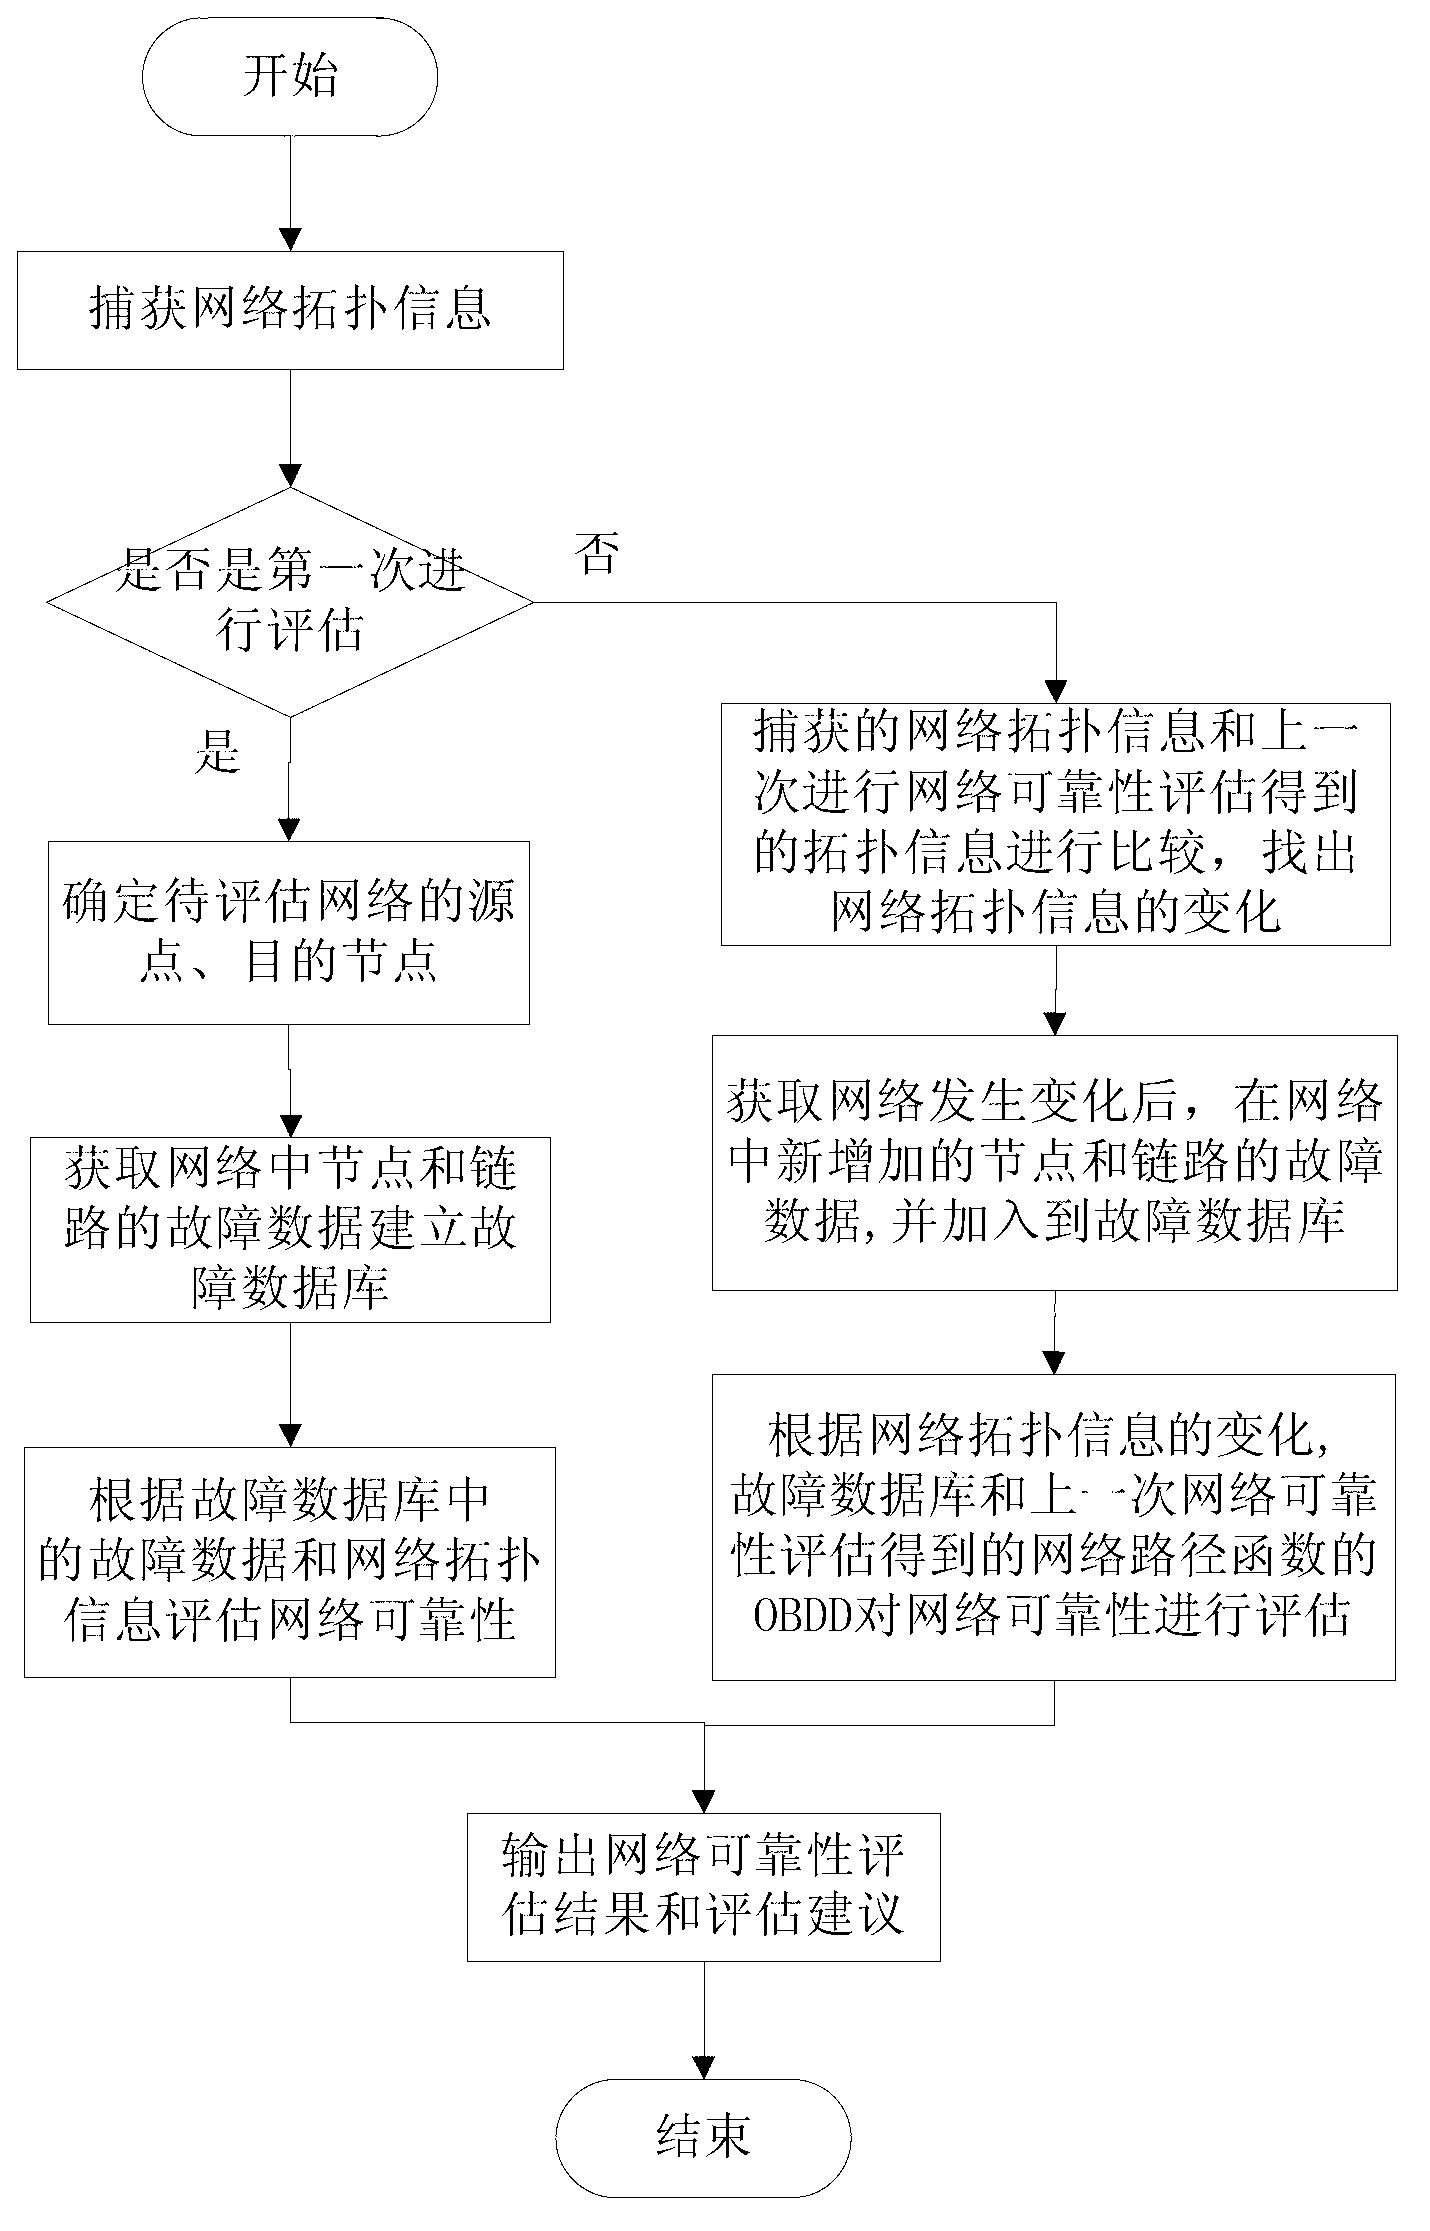 Method and device for dynamically evaluating reliability of network